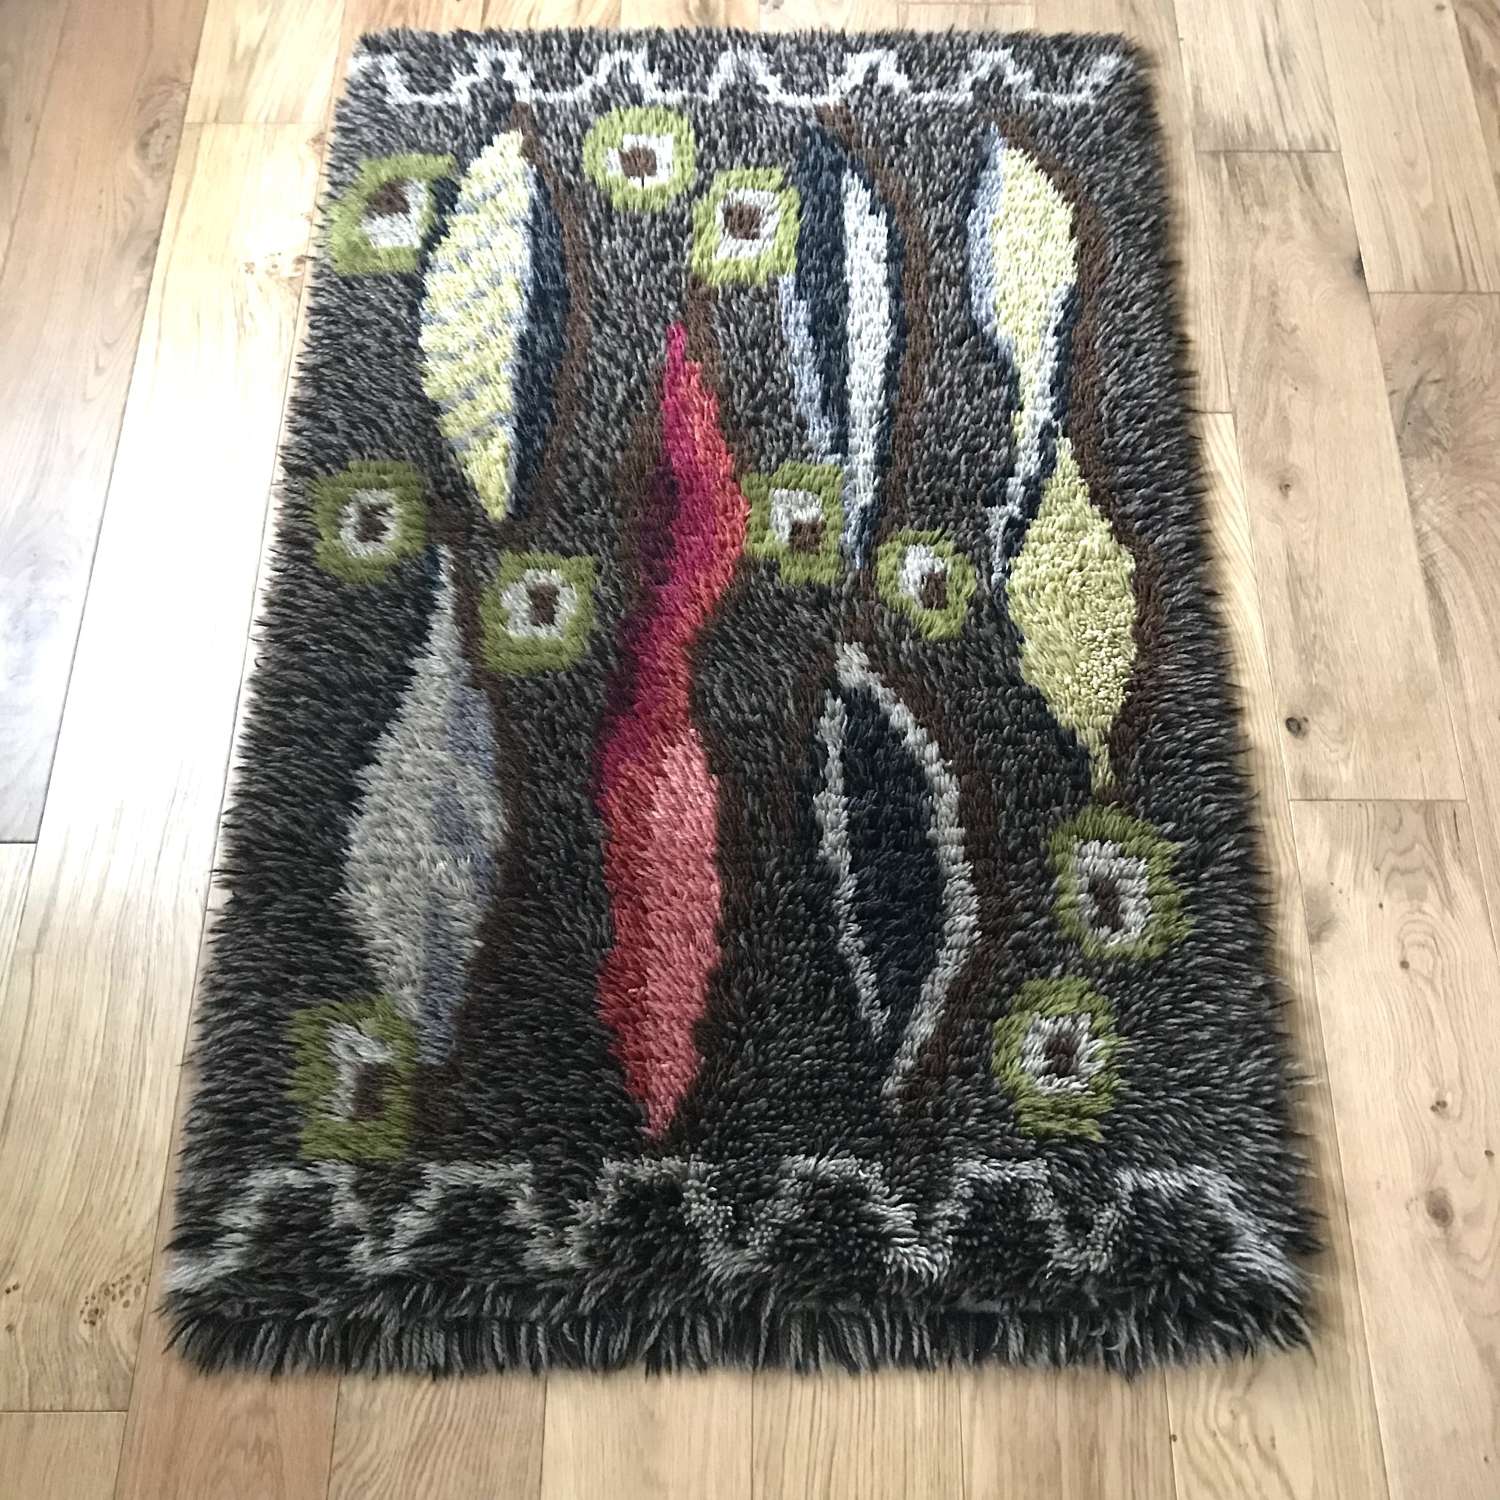 Swedish Rya rug with abstract leaves and seeds pattern c1960s.